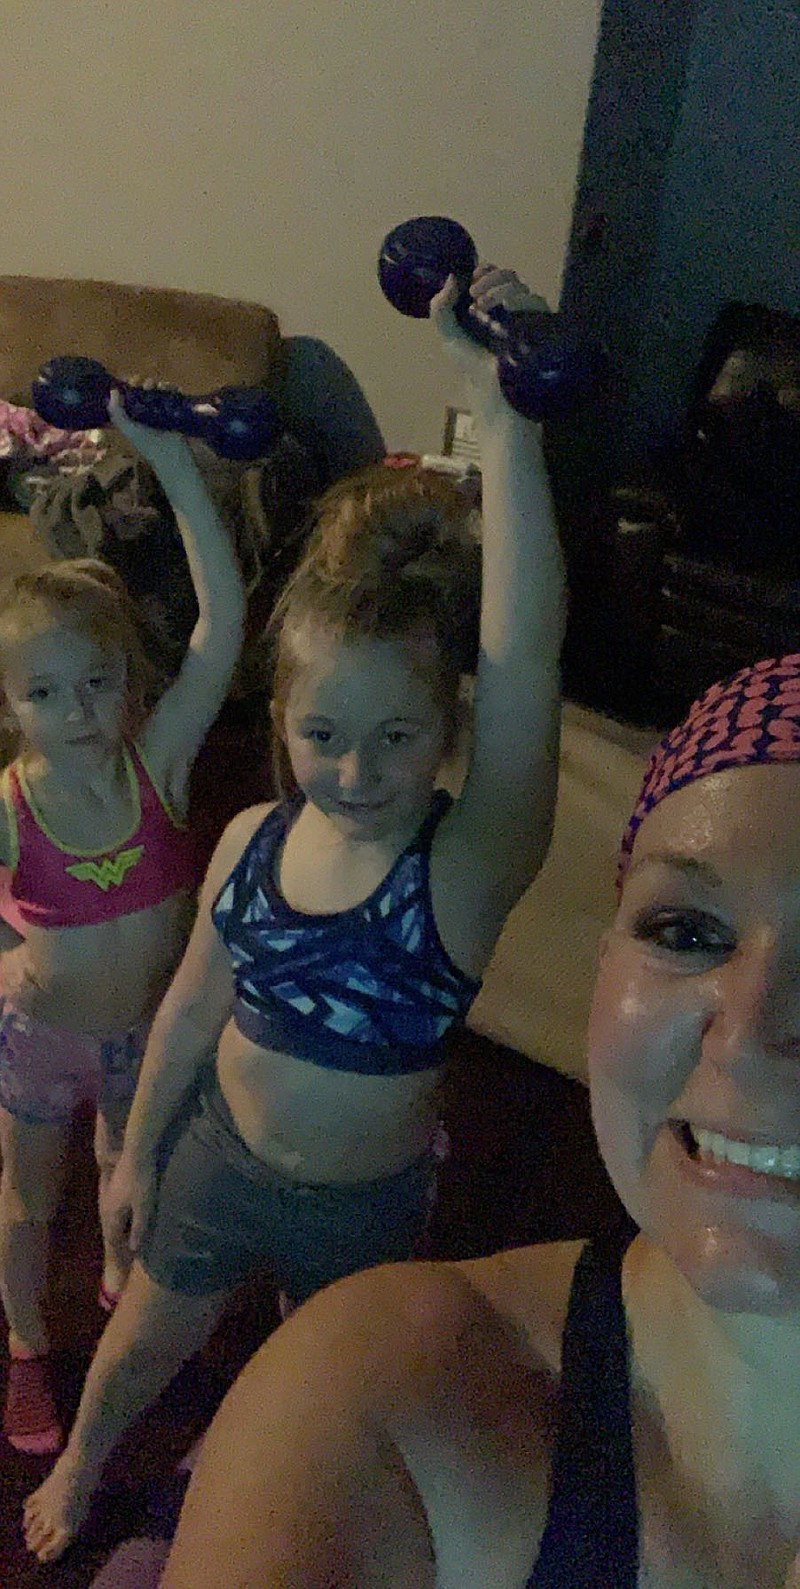 <p>(Courtesy of Crystal Tellman) Crystal Tellman takes a selfie with her daughters as they work out at home.</p>